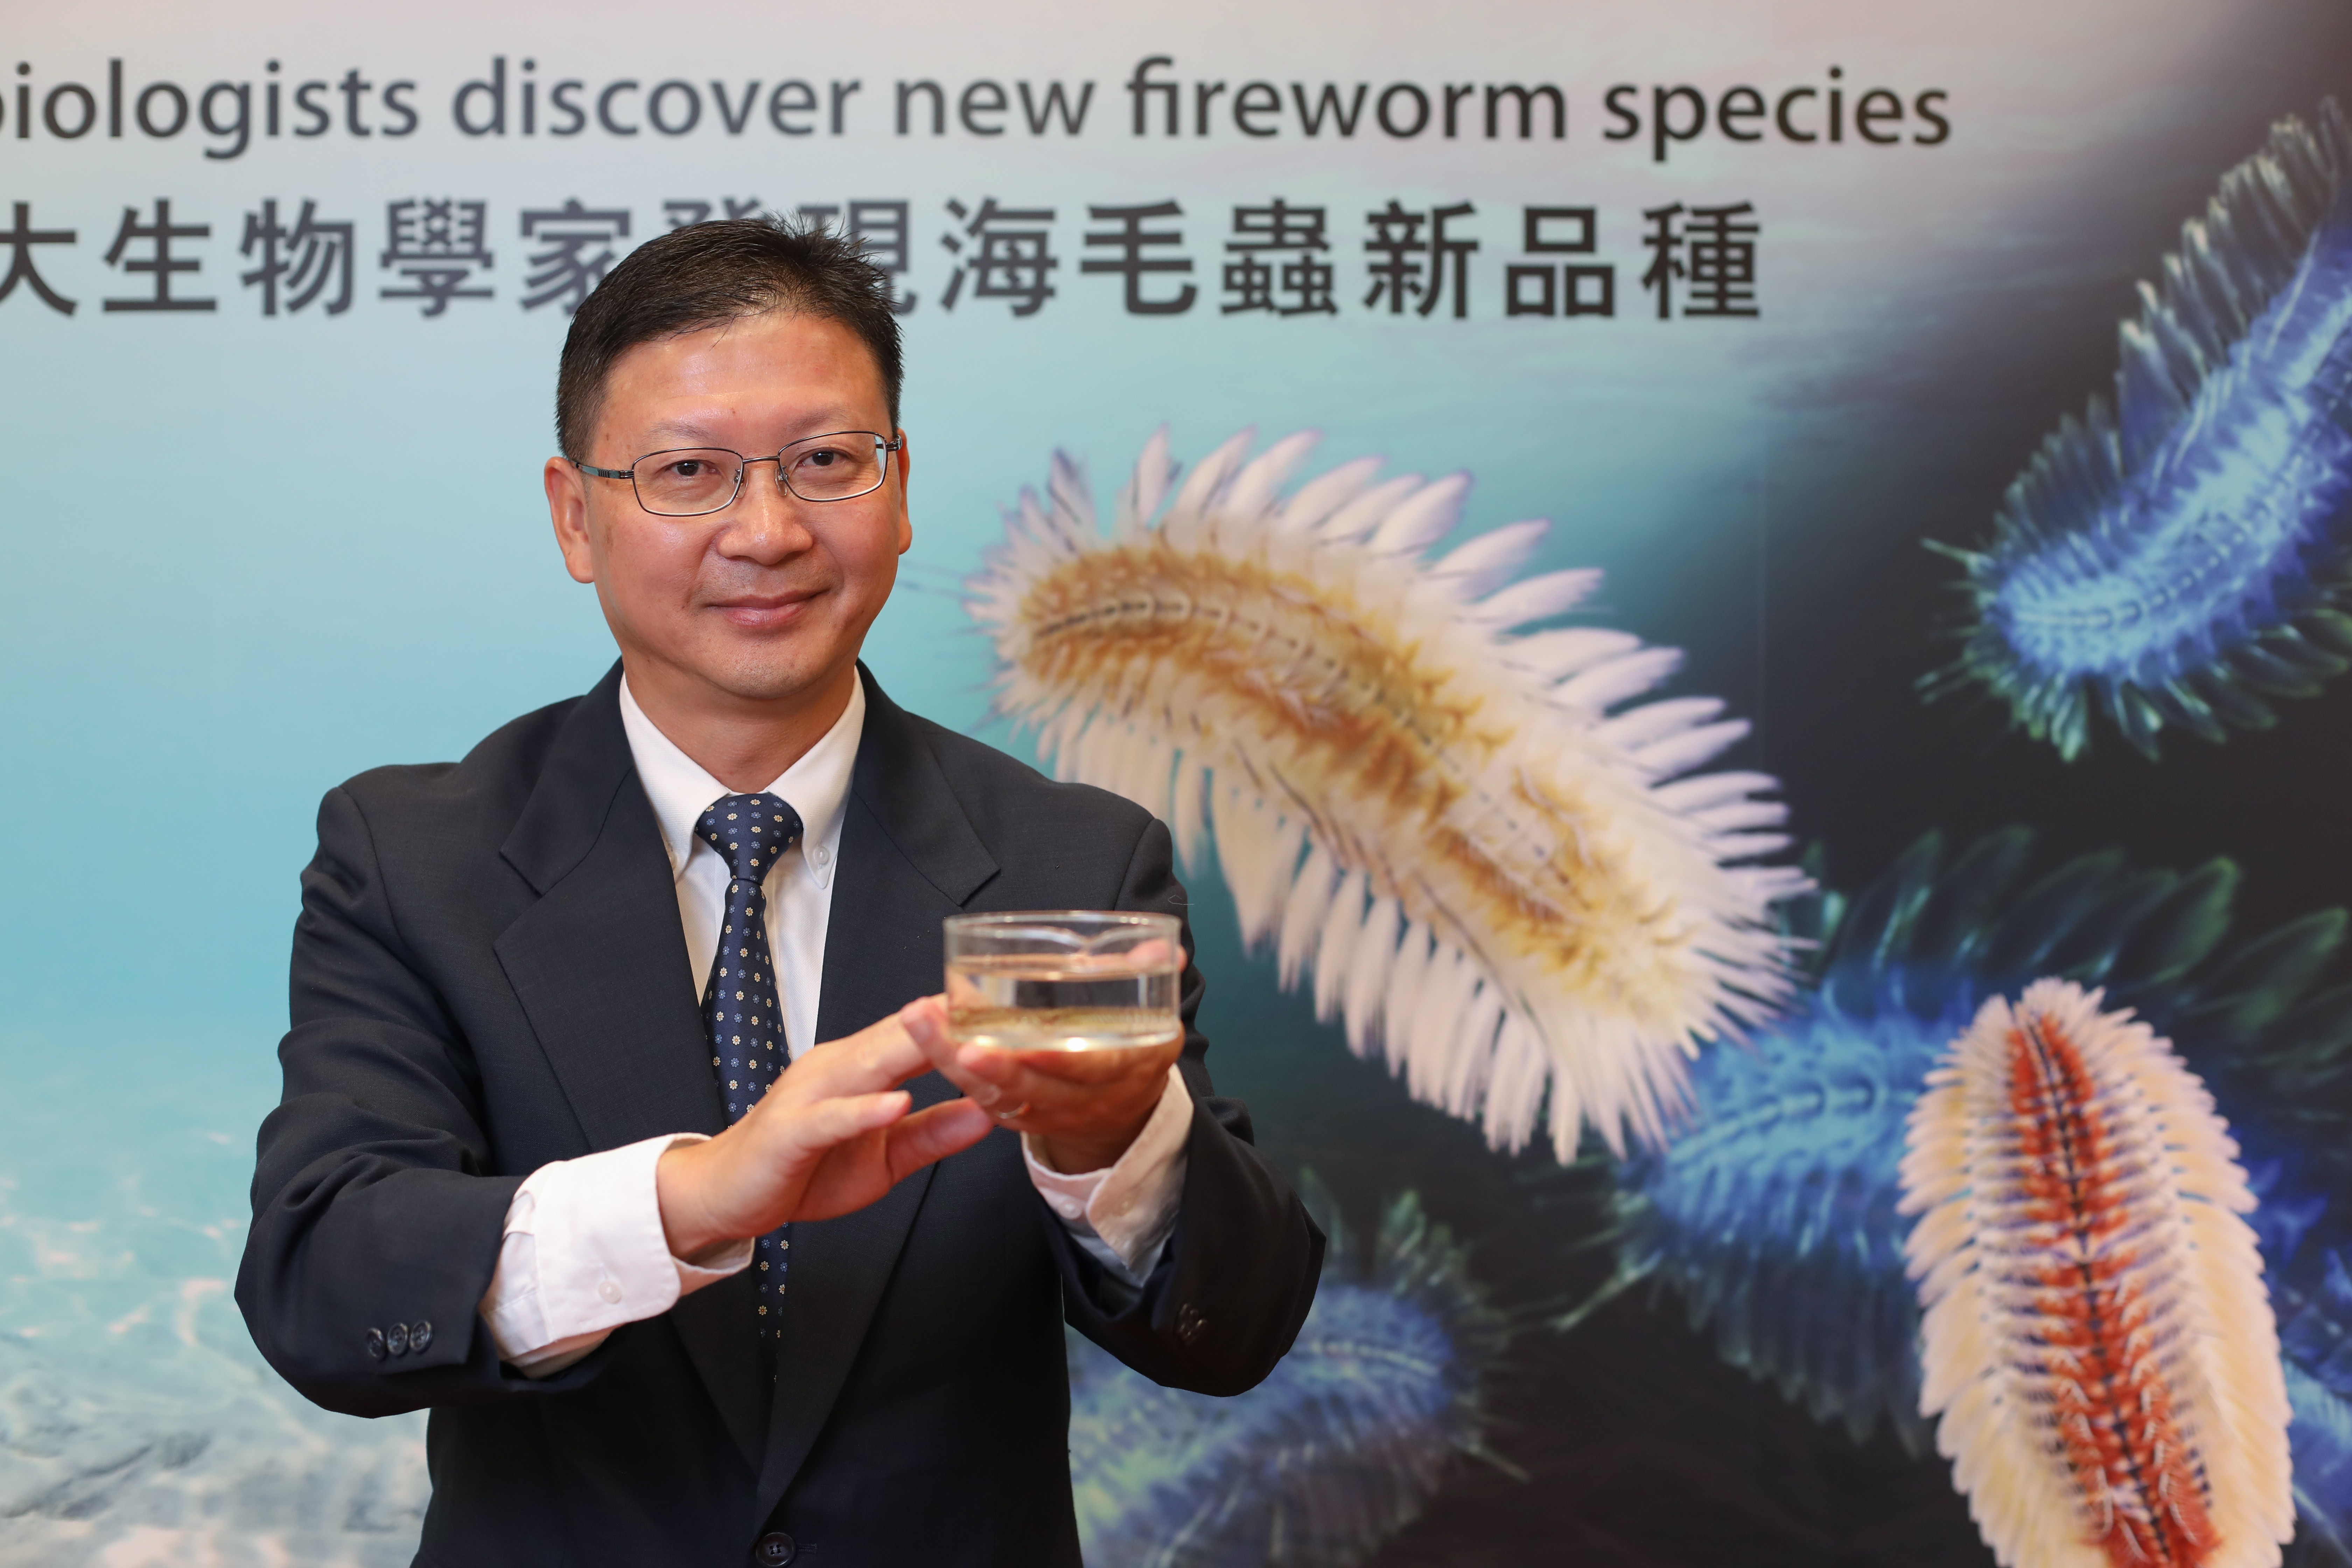 Baptist University biologist Qiu Jianwen discusses the discovery of a new fireworm species called Chloeia bimaculata. Photo: Xiaomei Chen